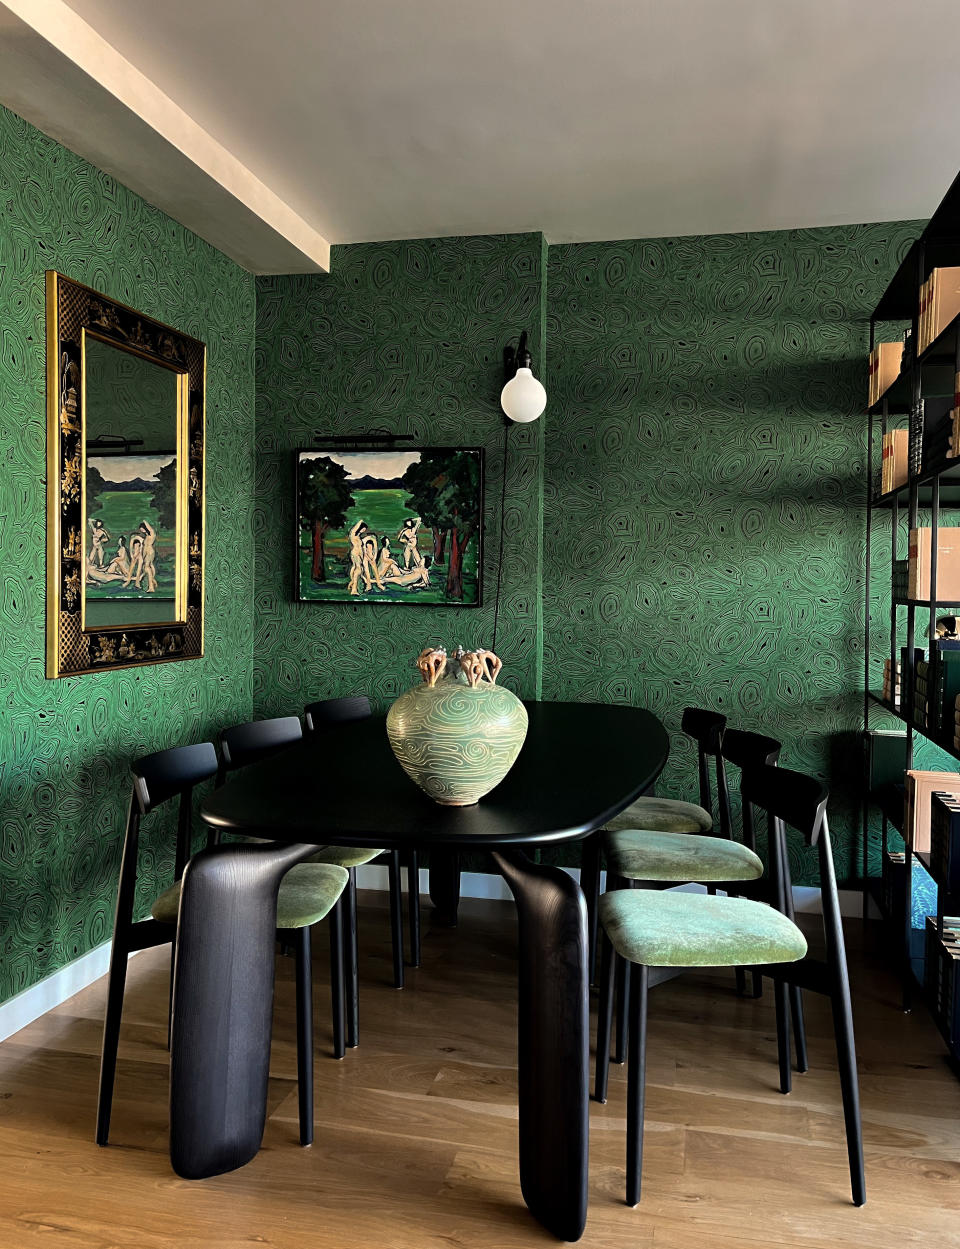 A dining room with a green wallpaper and black dining table and chairs